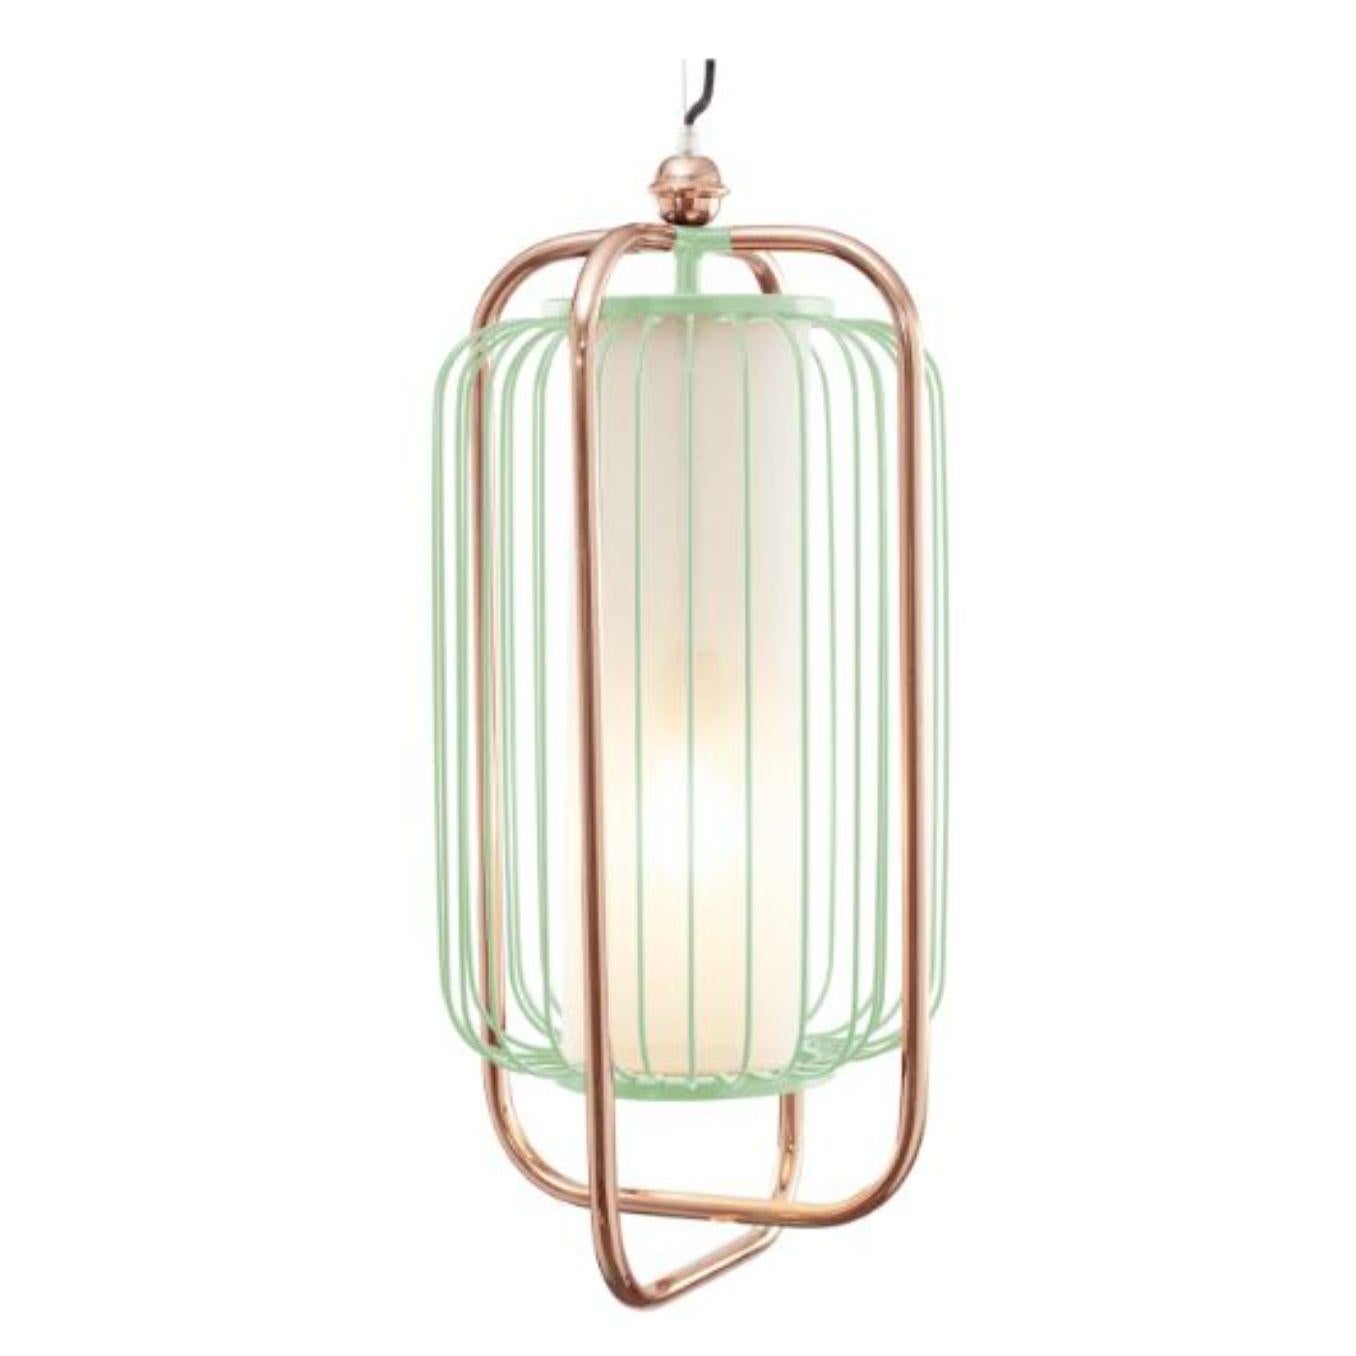 Copper and dream Jules II suspension lamp by Dooq
Dimensions: W 30 x D 30 x H 64 cm.
Materials: lacquered metal, polished or brushed metal, copper.
abat-jour: cotton
Also available in different colours and